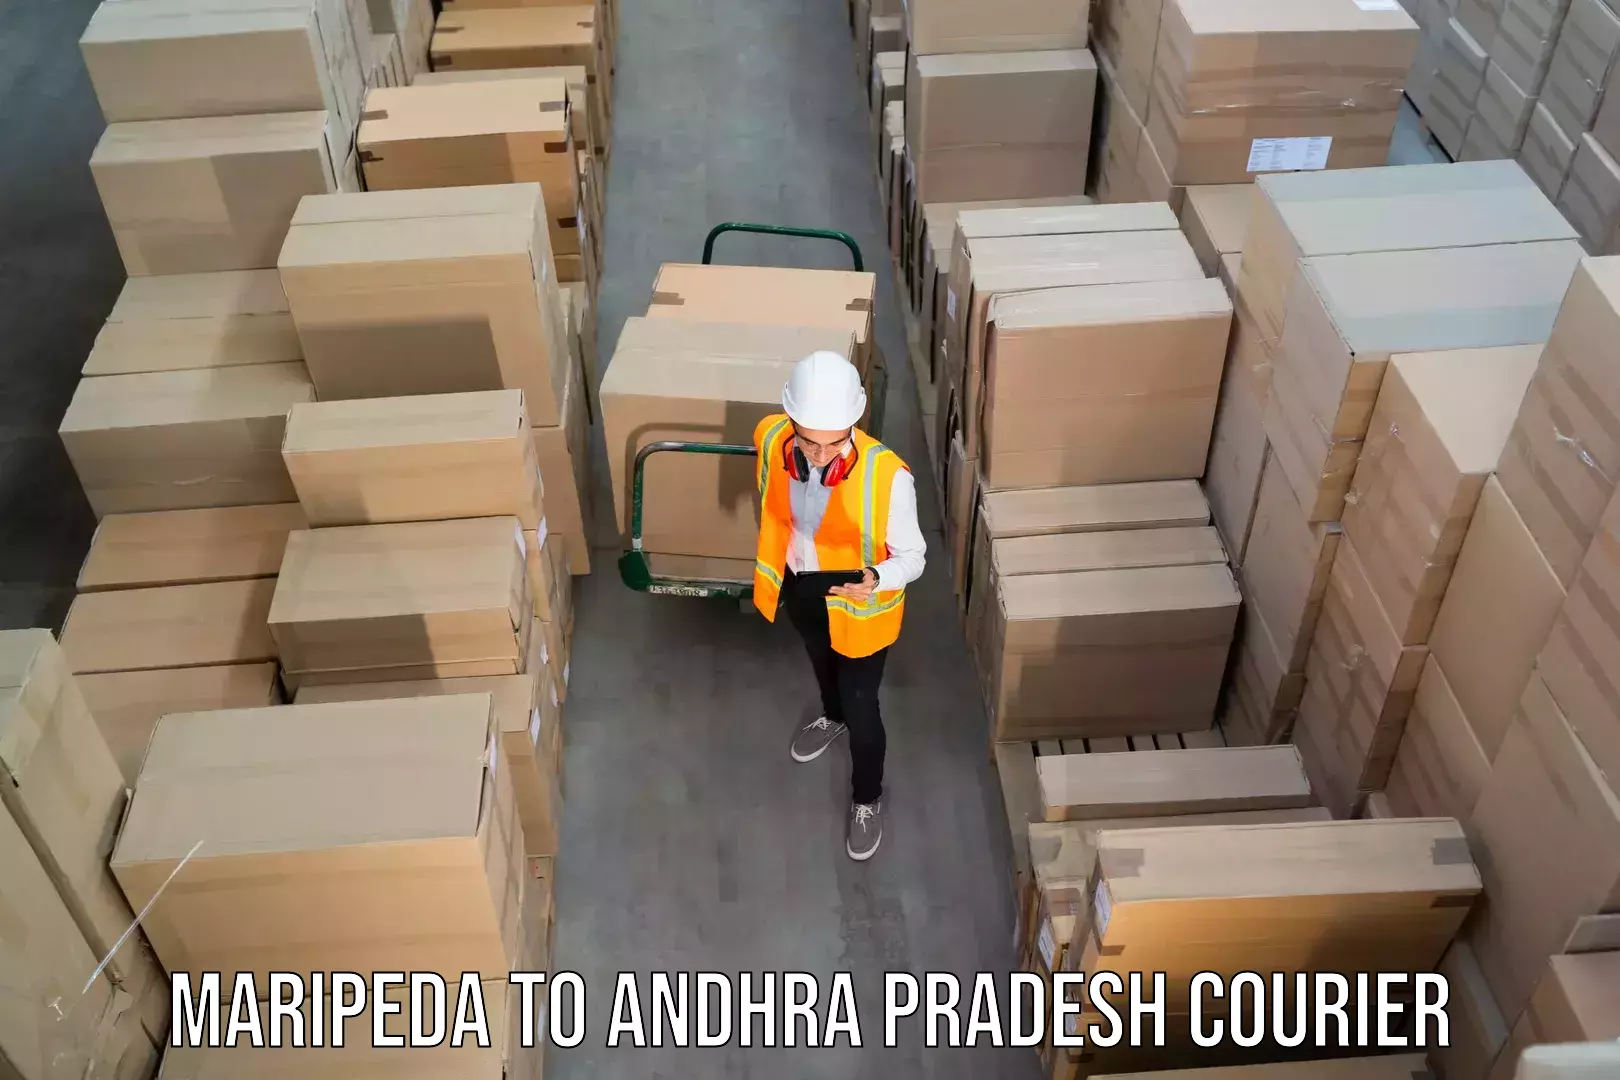 Courier service partnerships in Maripeda to Andhra Pradesh